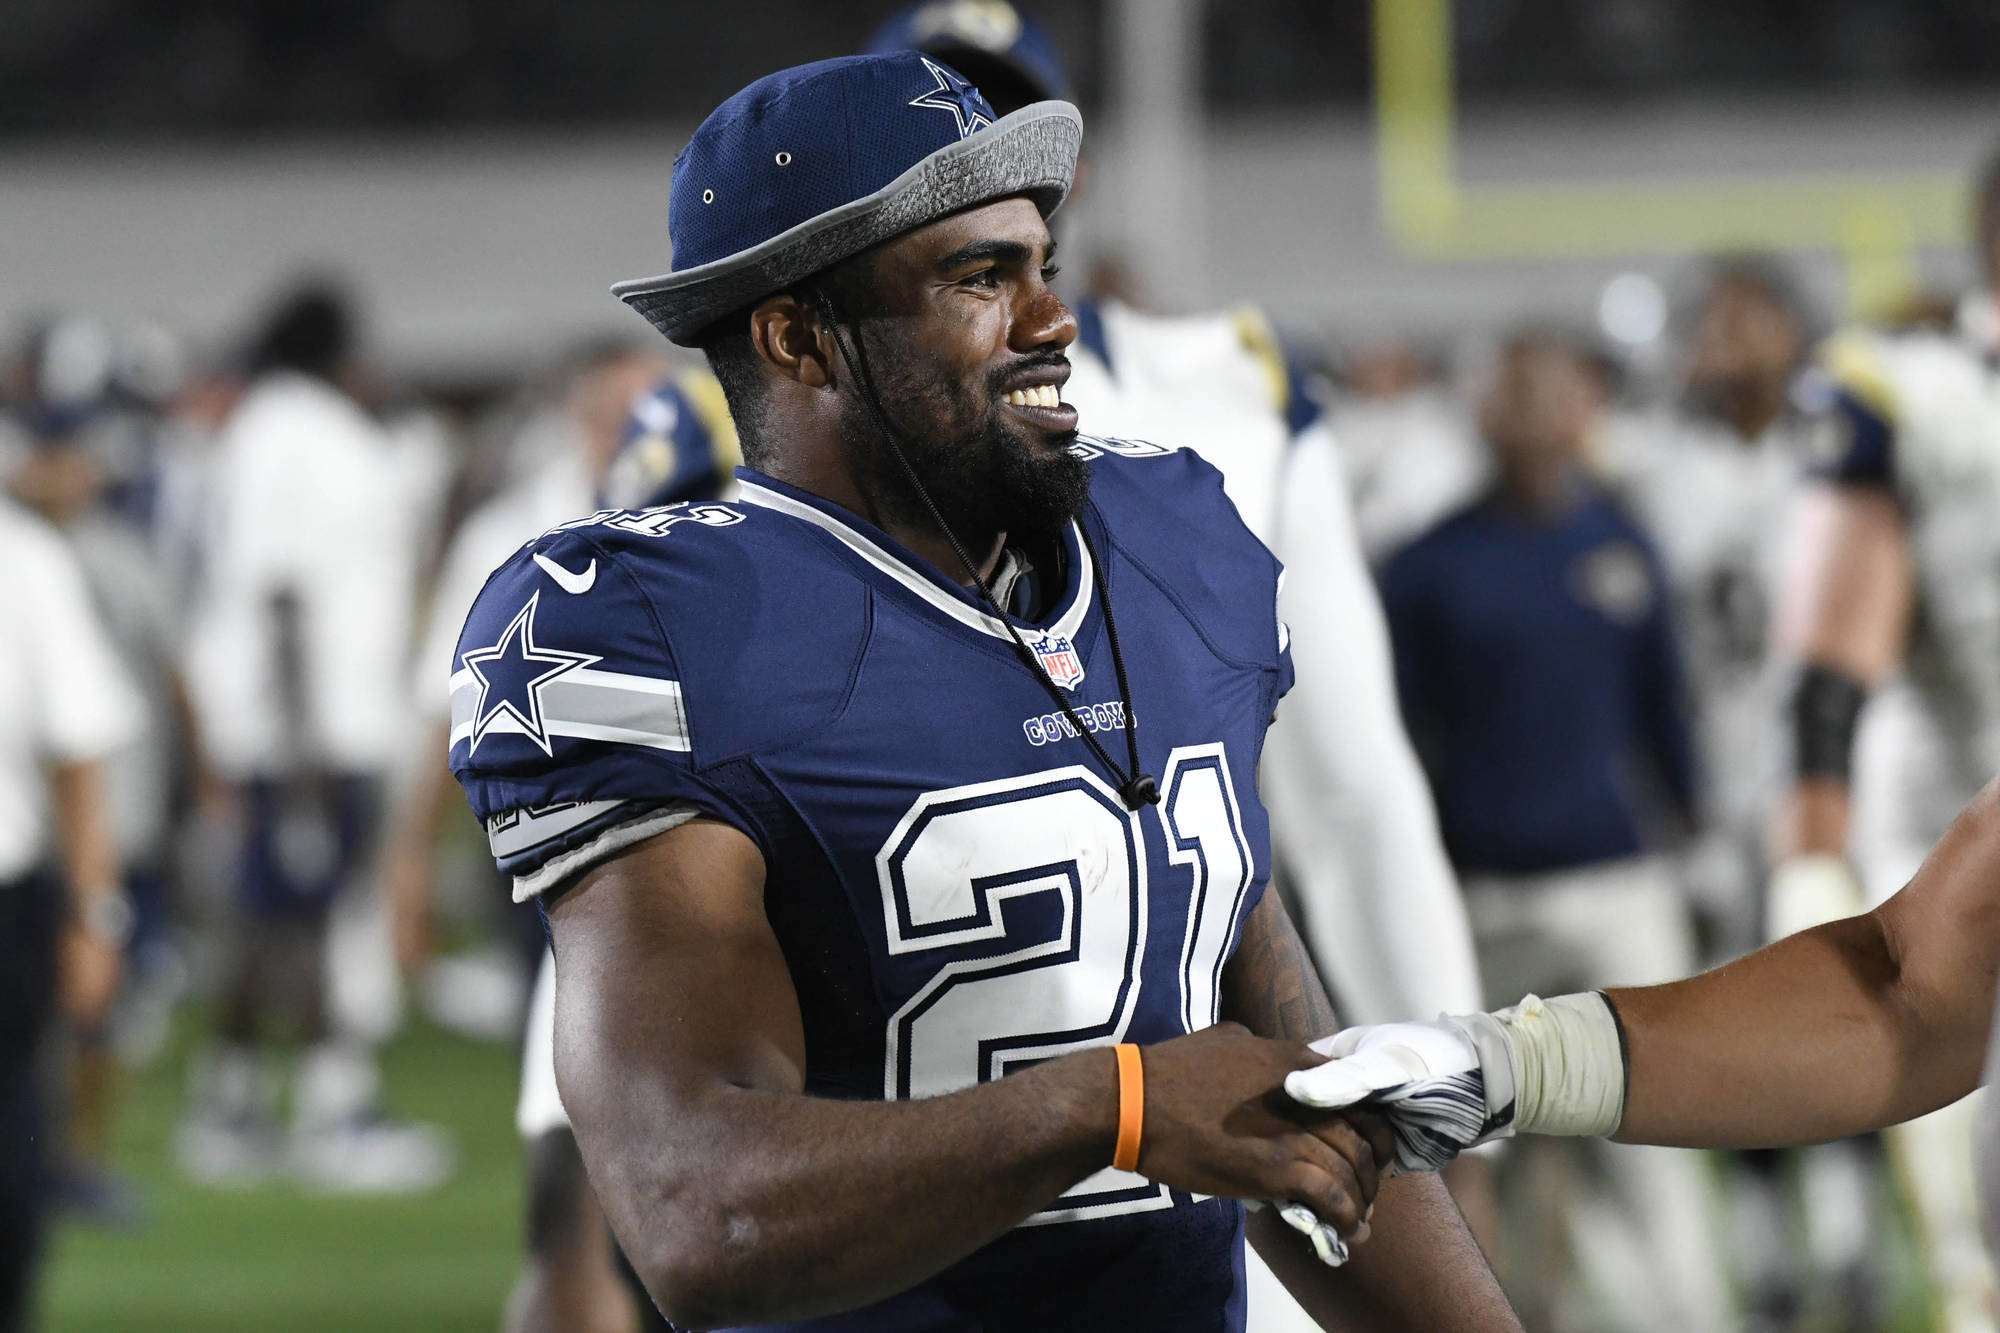 Cowboys' running back Ezekiel Elliott is set to suit up and play f...